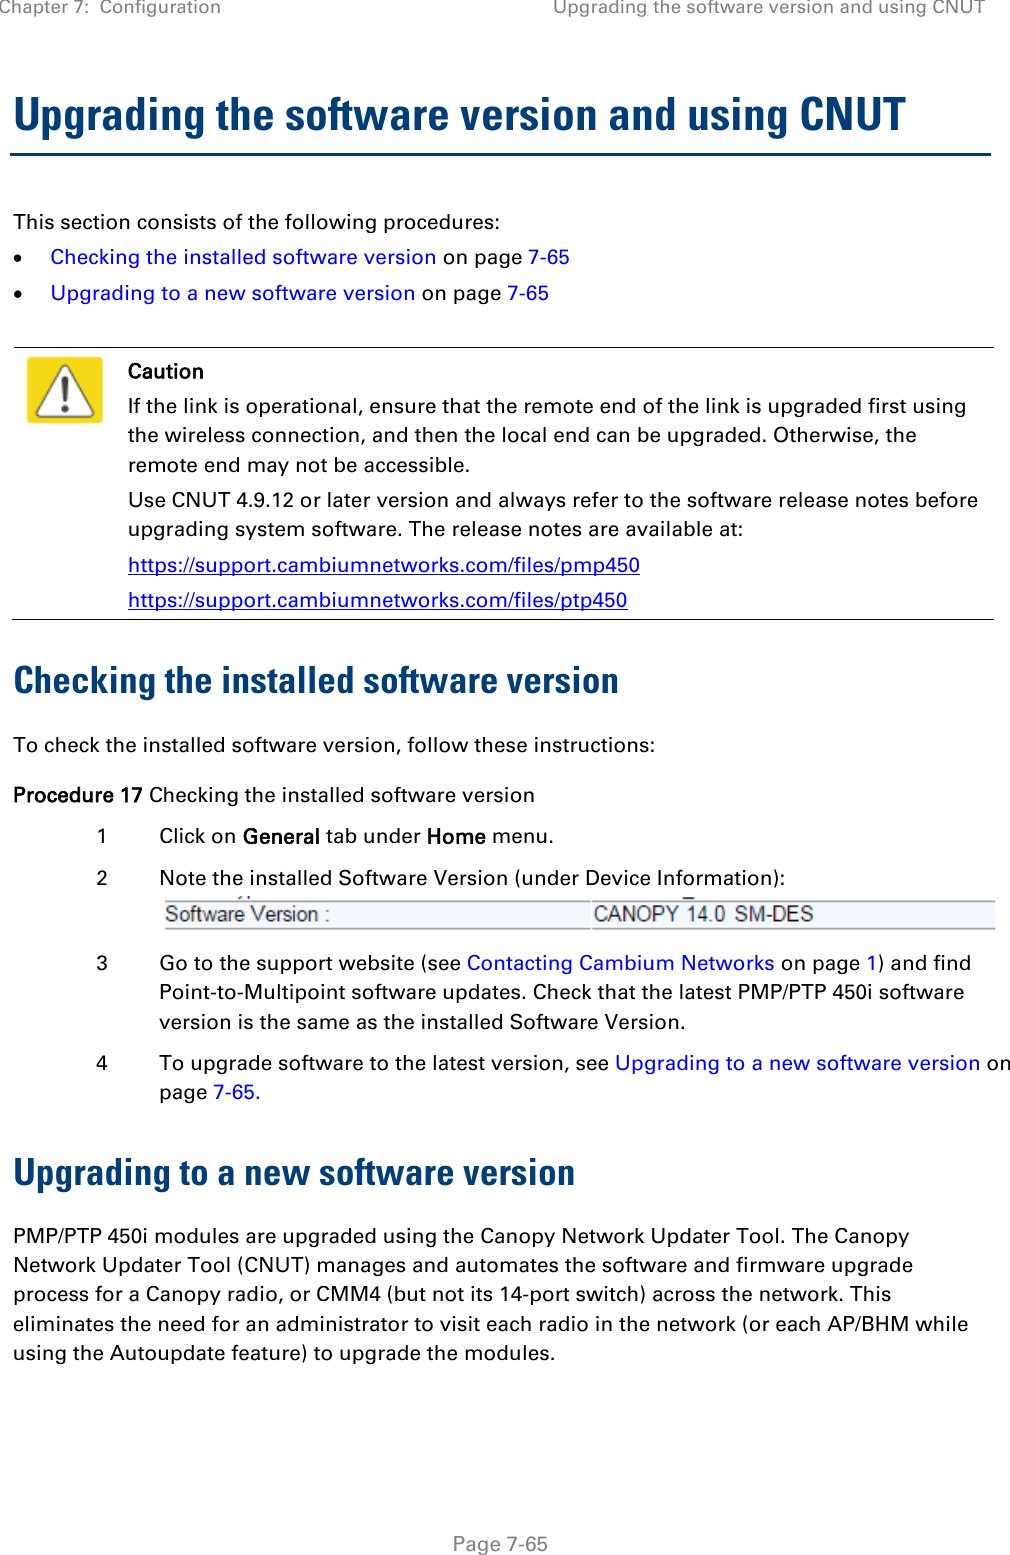 Chapter 7:  Configuration Upgrading the software version and using CNUT   Page 7-65 Upgrading the software version and using CNUT This section consists of the following procedures: • Checking the installed software version on page 7-65 • Upgrading to a new software version on page 7-65   Caution If the link is operational, ensure that the remote end of the link is upgraded first using the wireless connection, and then the local end can be upgraded. Otherwise, the remote end may not be accessible. Use CNUT 4.9.12 or later version and always refer to the software release notes before upgrading system software. The release notes are available at: https://support.cambiumnetworks.com/files/pmp450 https://support.cambiumnetworks.com/files/ptp450 Checking the installed software version To check the installed software version, follow these instructions: Procedure 17 Checking the installed software version 1  Click on General tab under Home menu. 2  Note the installed Software Version (under Device Information):  3  Go to the support website (see Contacting Cambium Networks on page 1) and find Point-to-Multipoint software updates. Check that the latest PMP/PTP 450i software version is the same as the installed Software Version. 4  To upgrade software to the latest version, see Upgrading to a new software version on page 7-65. Upgrading to a new software version PMP/PTP 450i modules are upgraded using the Canopy Network Updater Tool. The Canopy Network Updater Tool (CNUT) manages and automates the software and firmware upgrade process for a Canopy radio, or CMM4 (but not its 14-port switch) across the network. This eliminates the need for an administrator to visit each radio in the network (or each AP/BHM while using the Autoupdate feature) to upgrade the modules.  